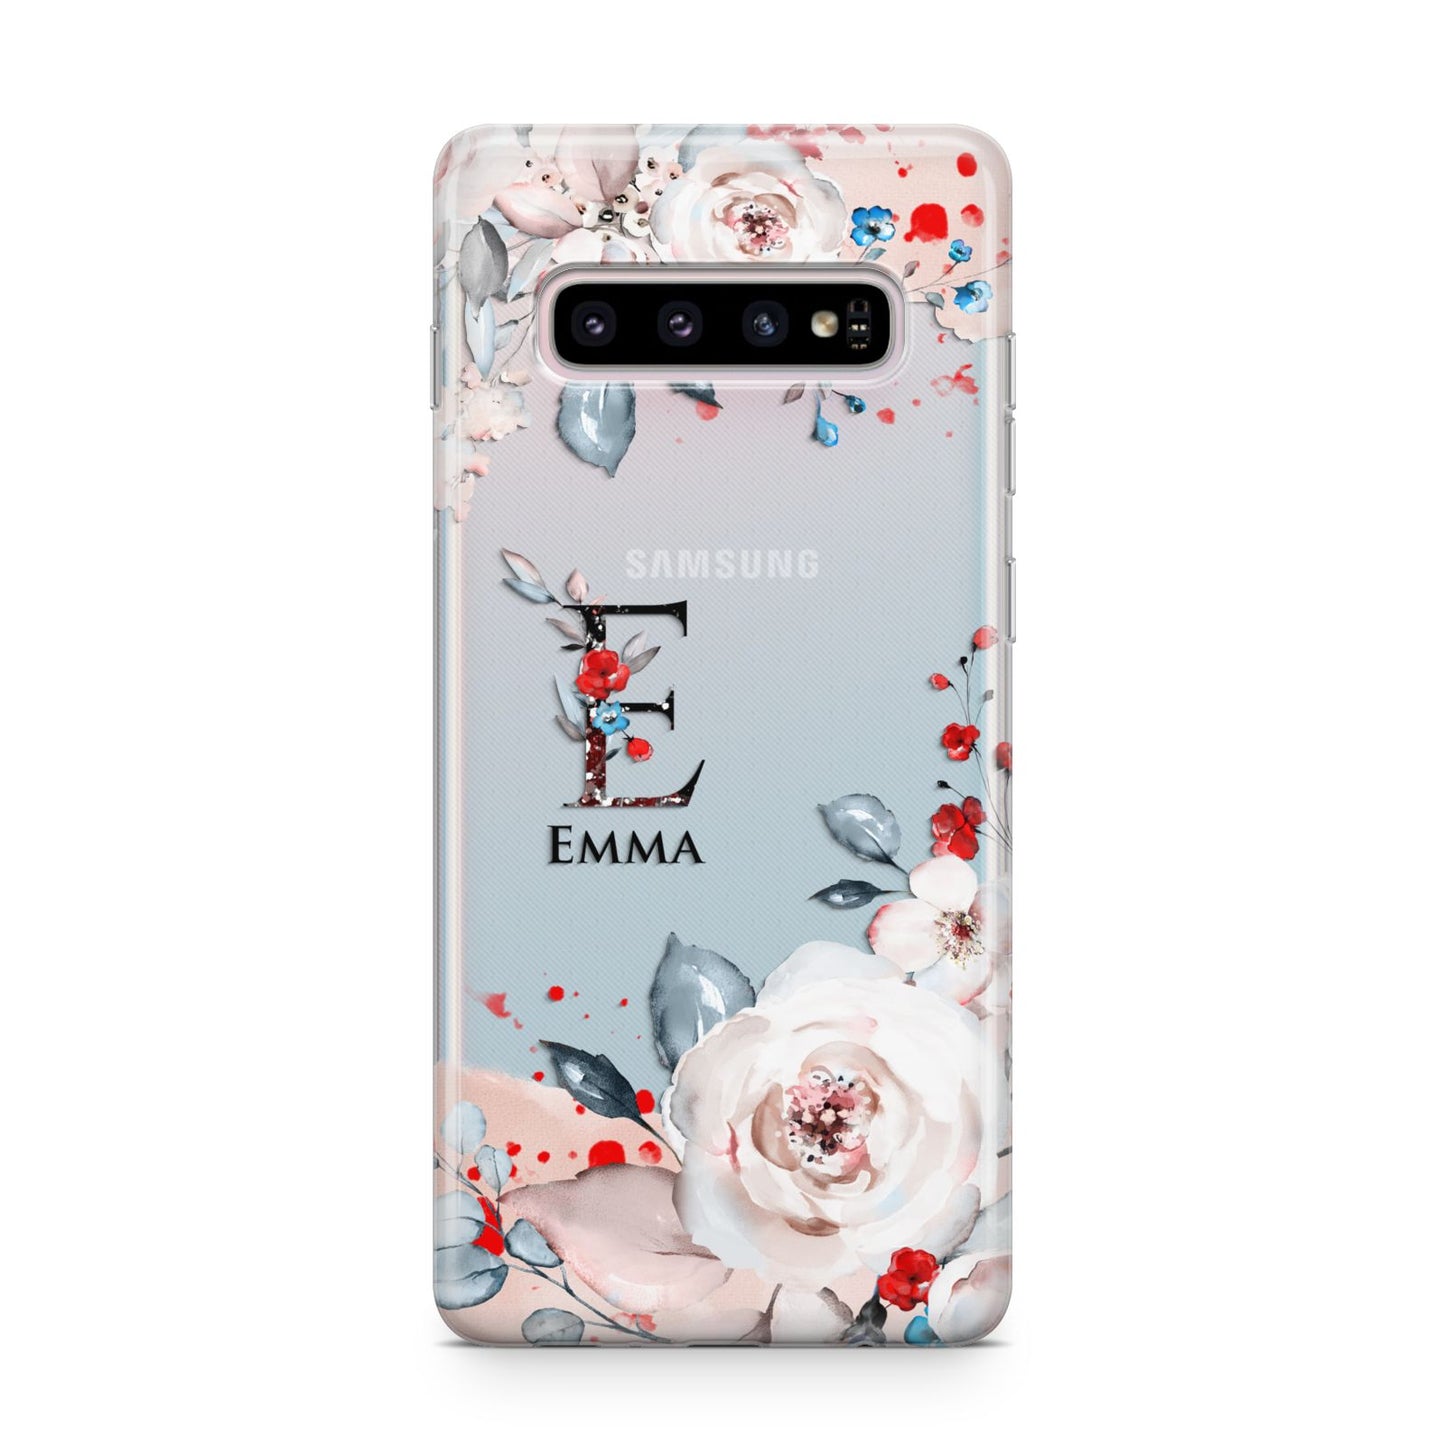 Monogrammed Roses Floral Wreath Samsung Galaxy S10 Plus Case